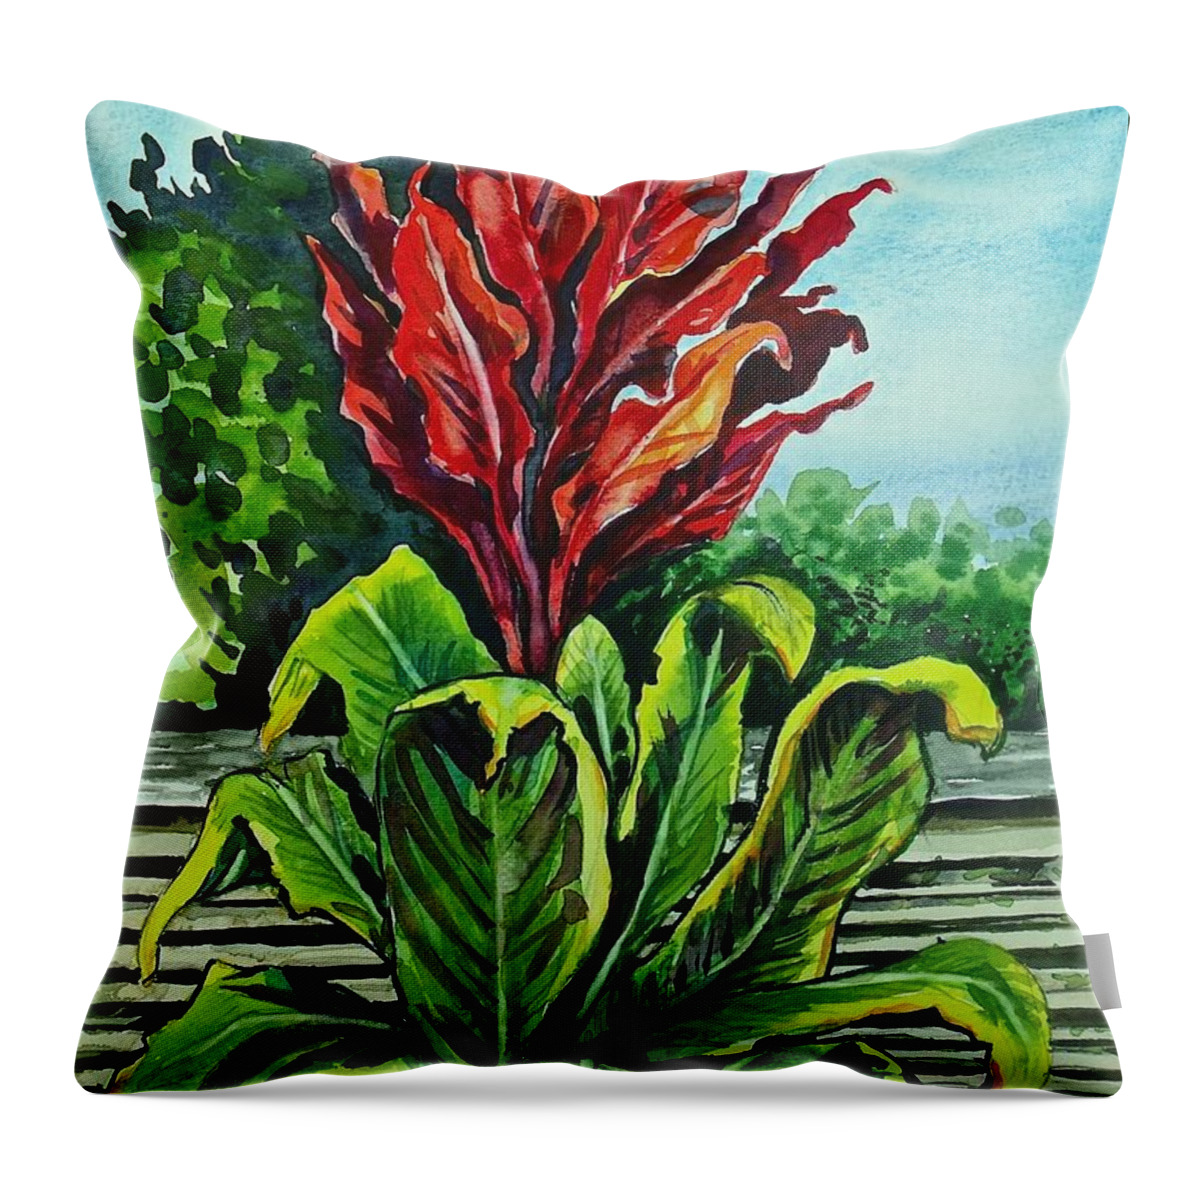 Watercolor Throw Pillow featuring the painting Kim Dracena by Lynne Haines